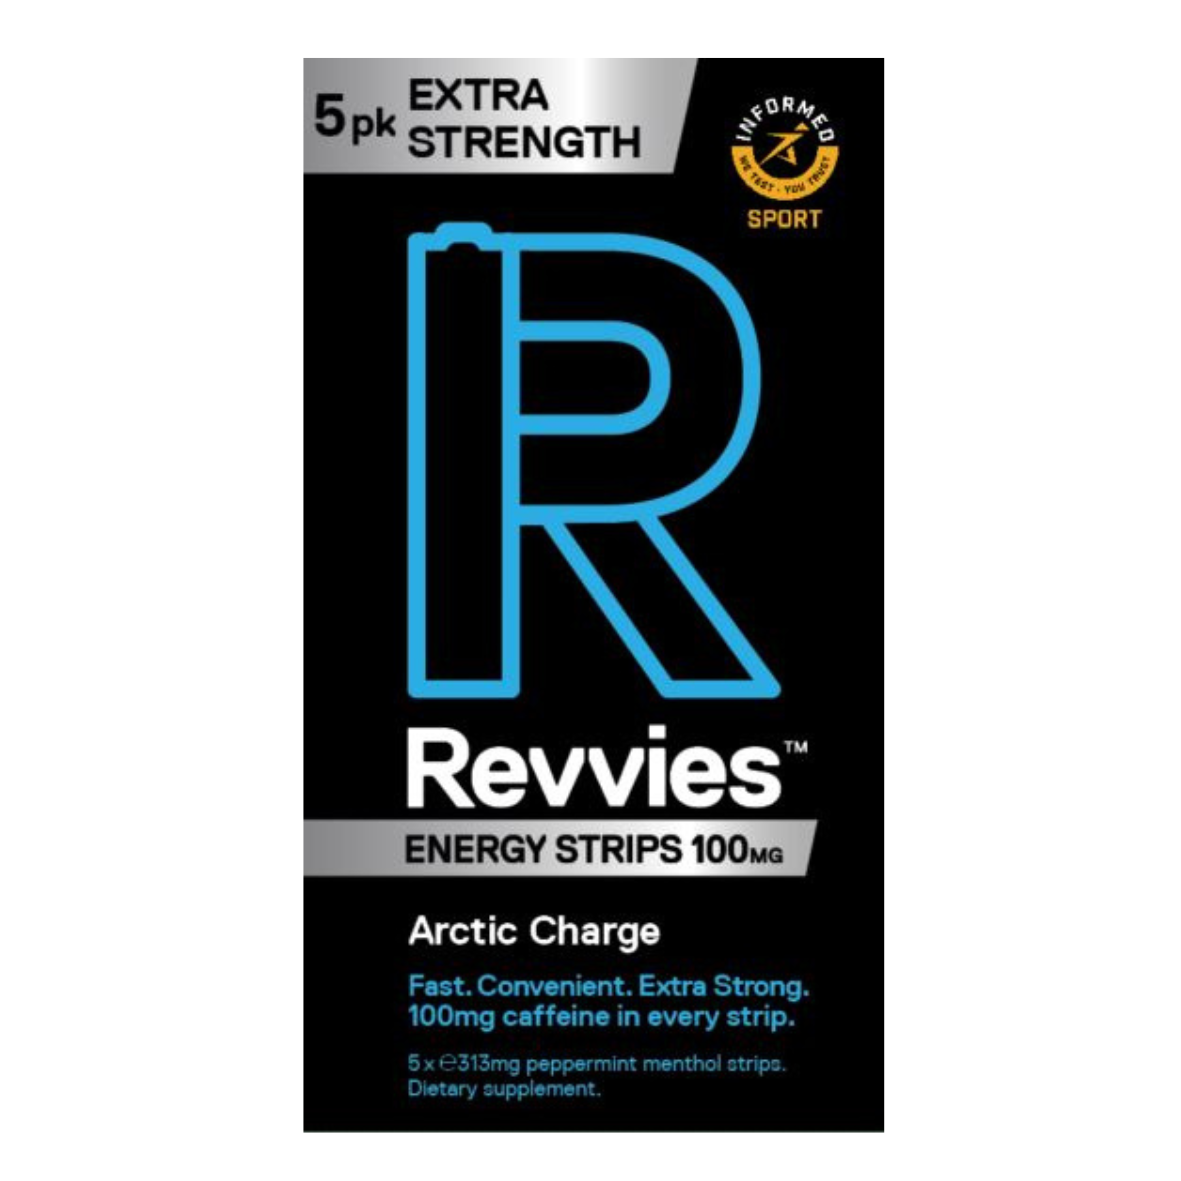 Revvies Arctic Charge Energy Strips with 100mg of caffeine.